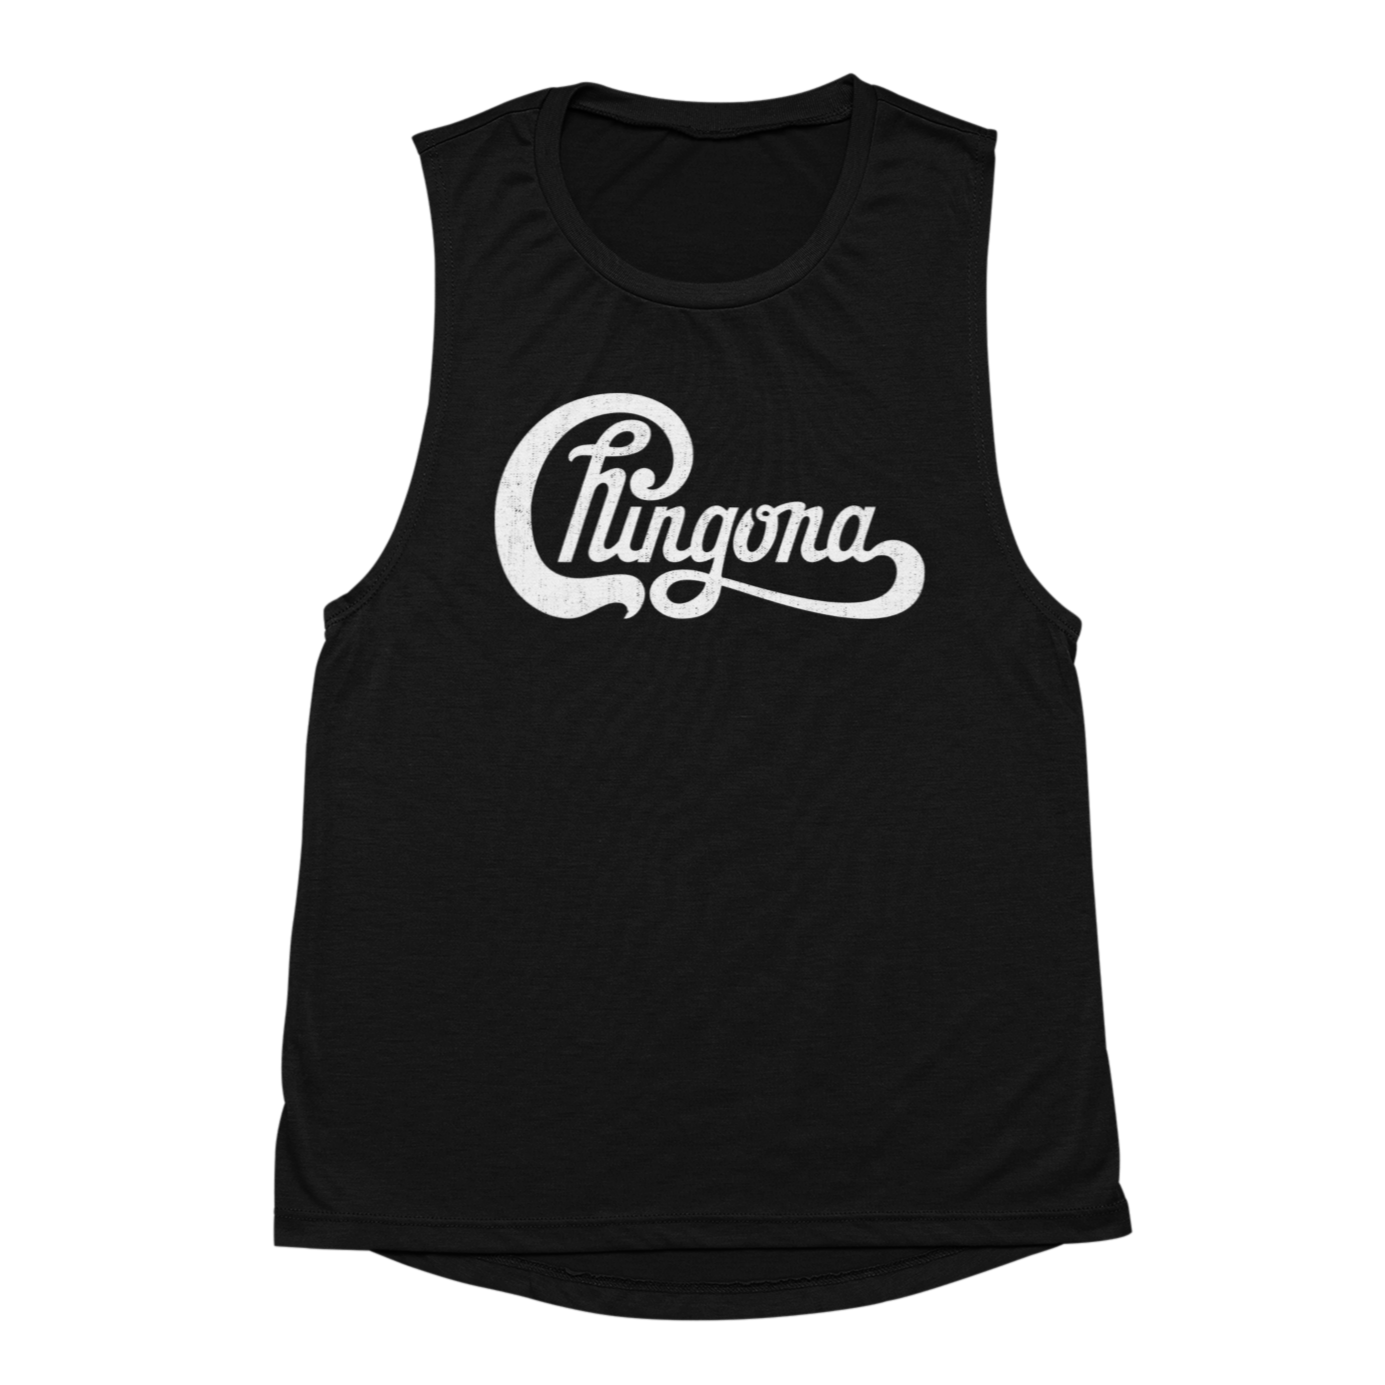 Black tank top for Latinas, featuring a humorous and empowering logo that says 'Chingona', parodying the famous rock-band logo of Chicago